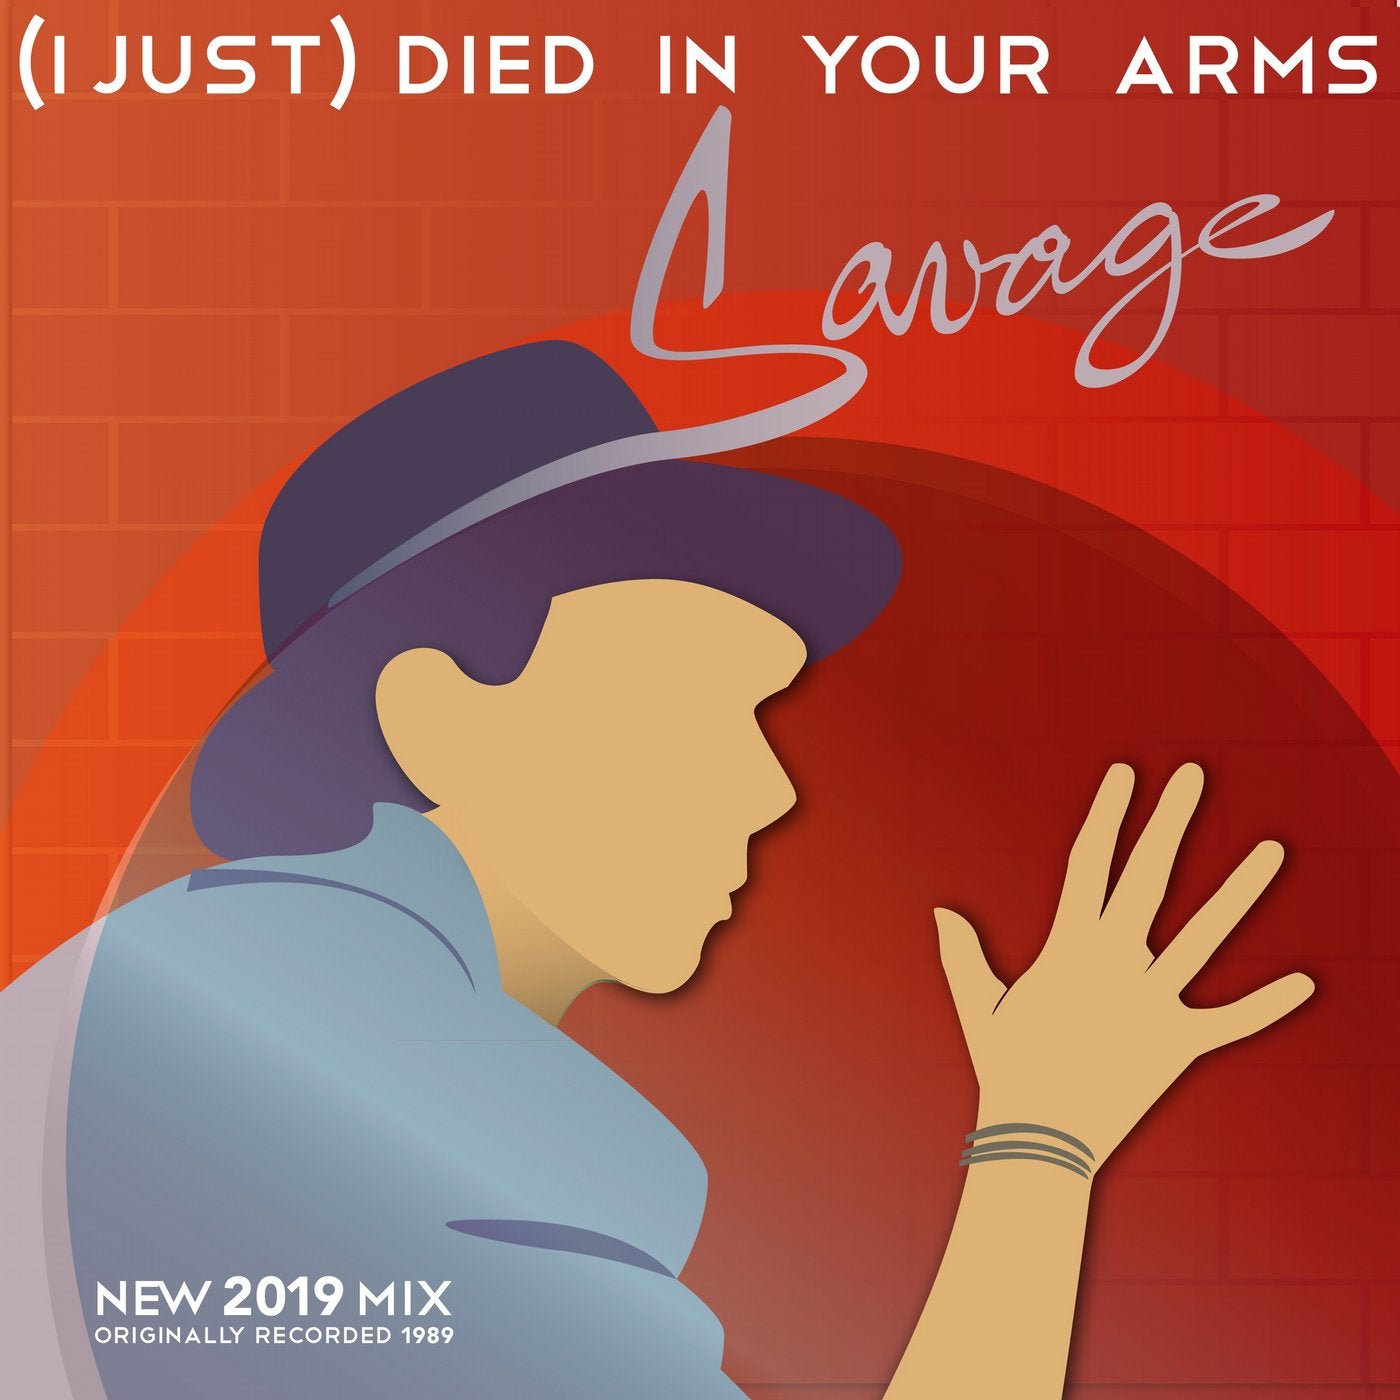 (I Just) Died in Your Arms 2019